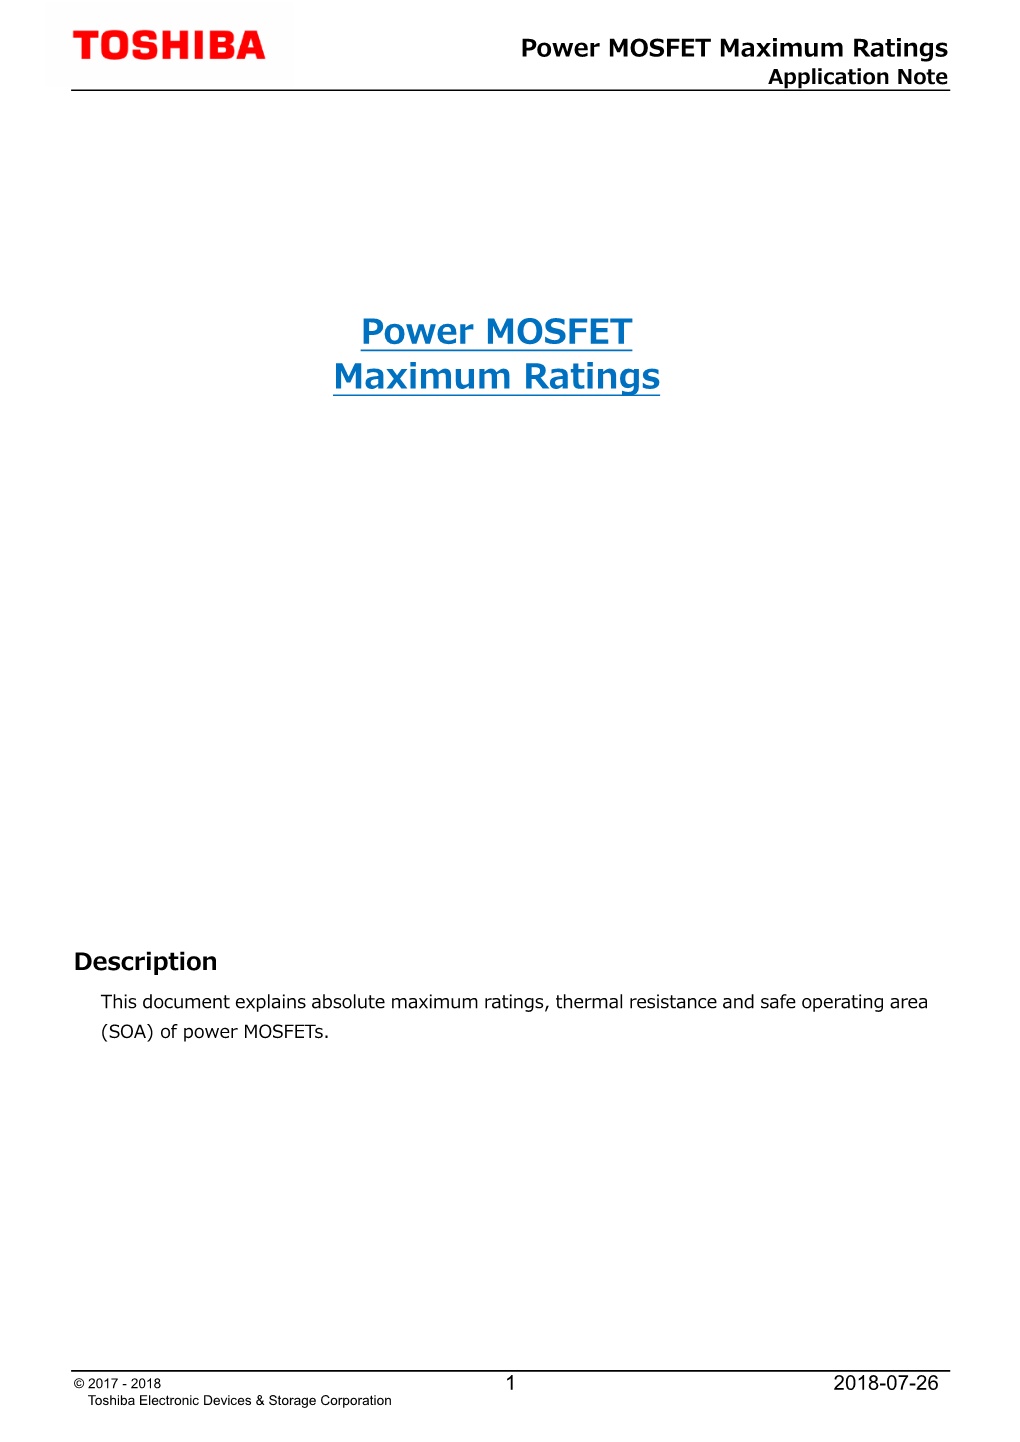 Power MOSFET Maximum Ratings Application Note